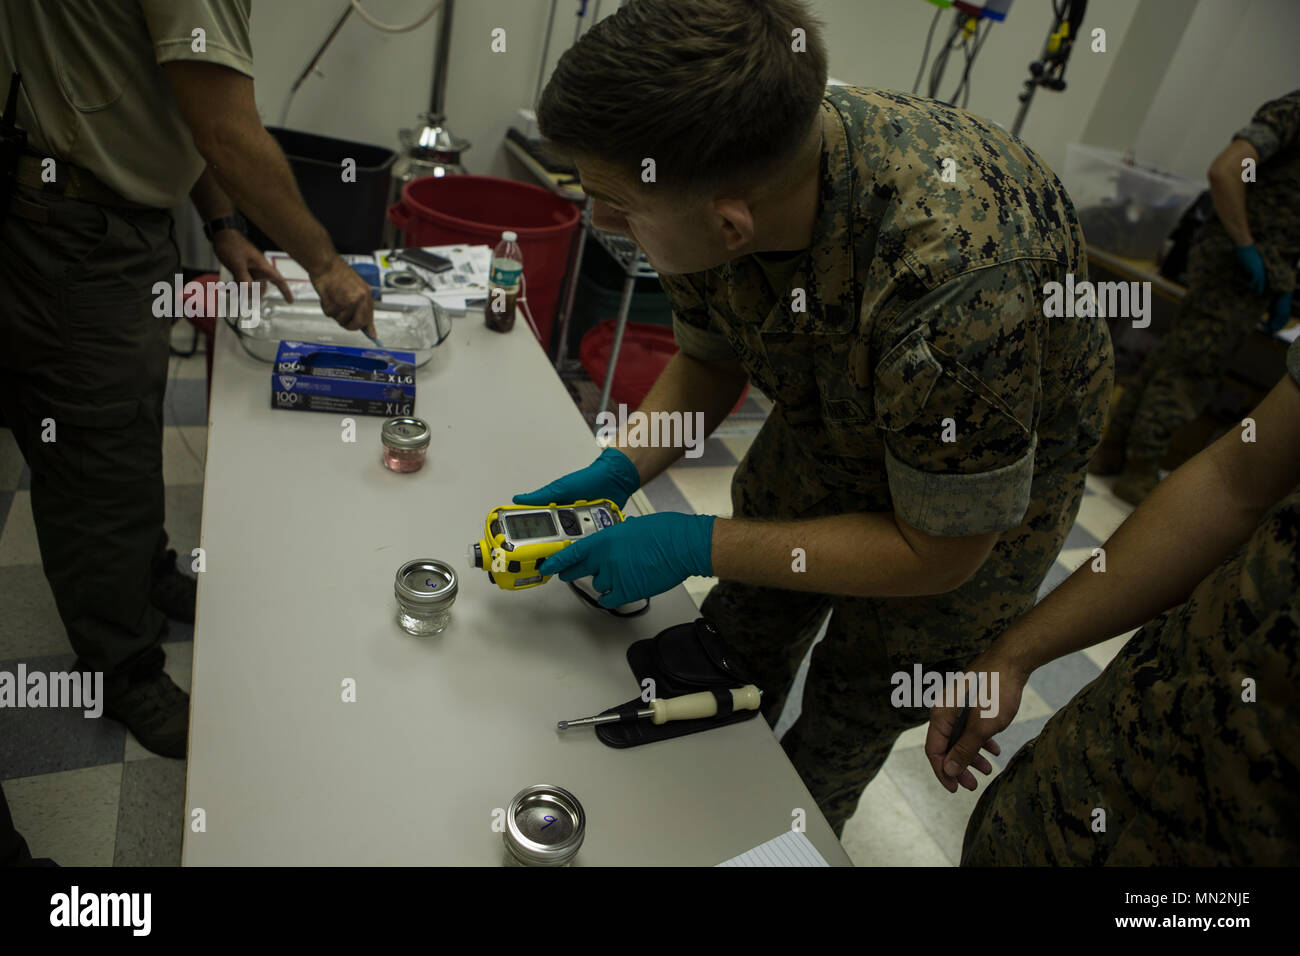 U.S. Marine Corps Sgt. Brandon Smith, a Chemical, Biological, Radiological,  Nuclear (CBRN) Defense Specialists, with Headquarters company, Headquarters  Battalion, 2nd Marine Division (2d MARDIV), test the potential of Hydrogen  (PH) levels of